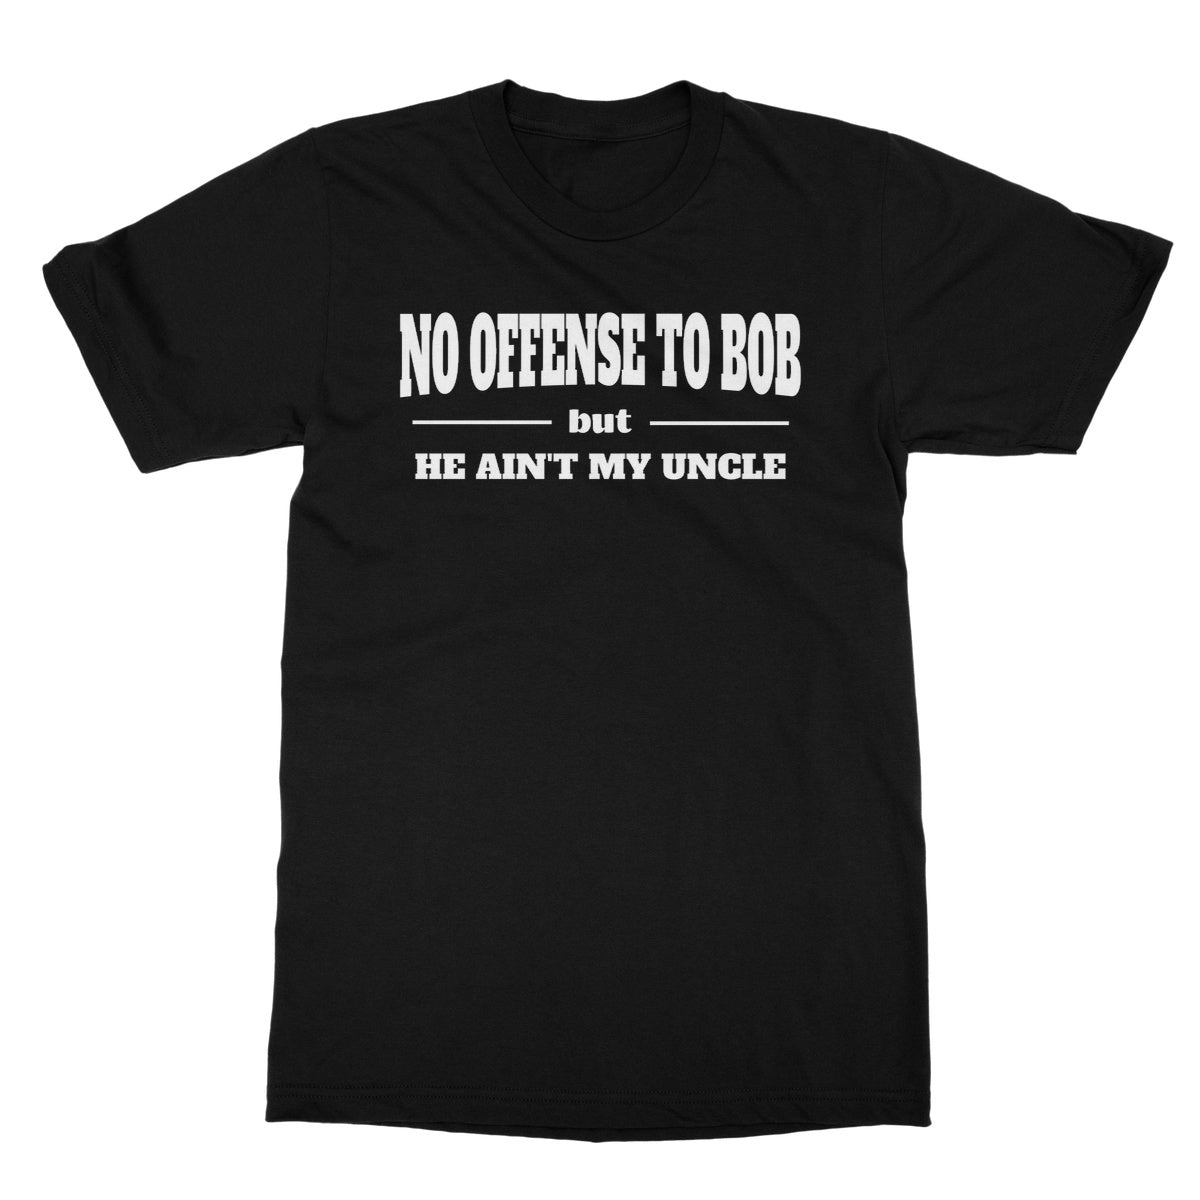 bob is not my uncle t shirt black